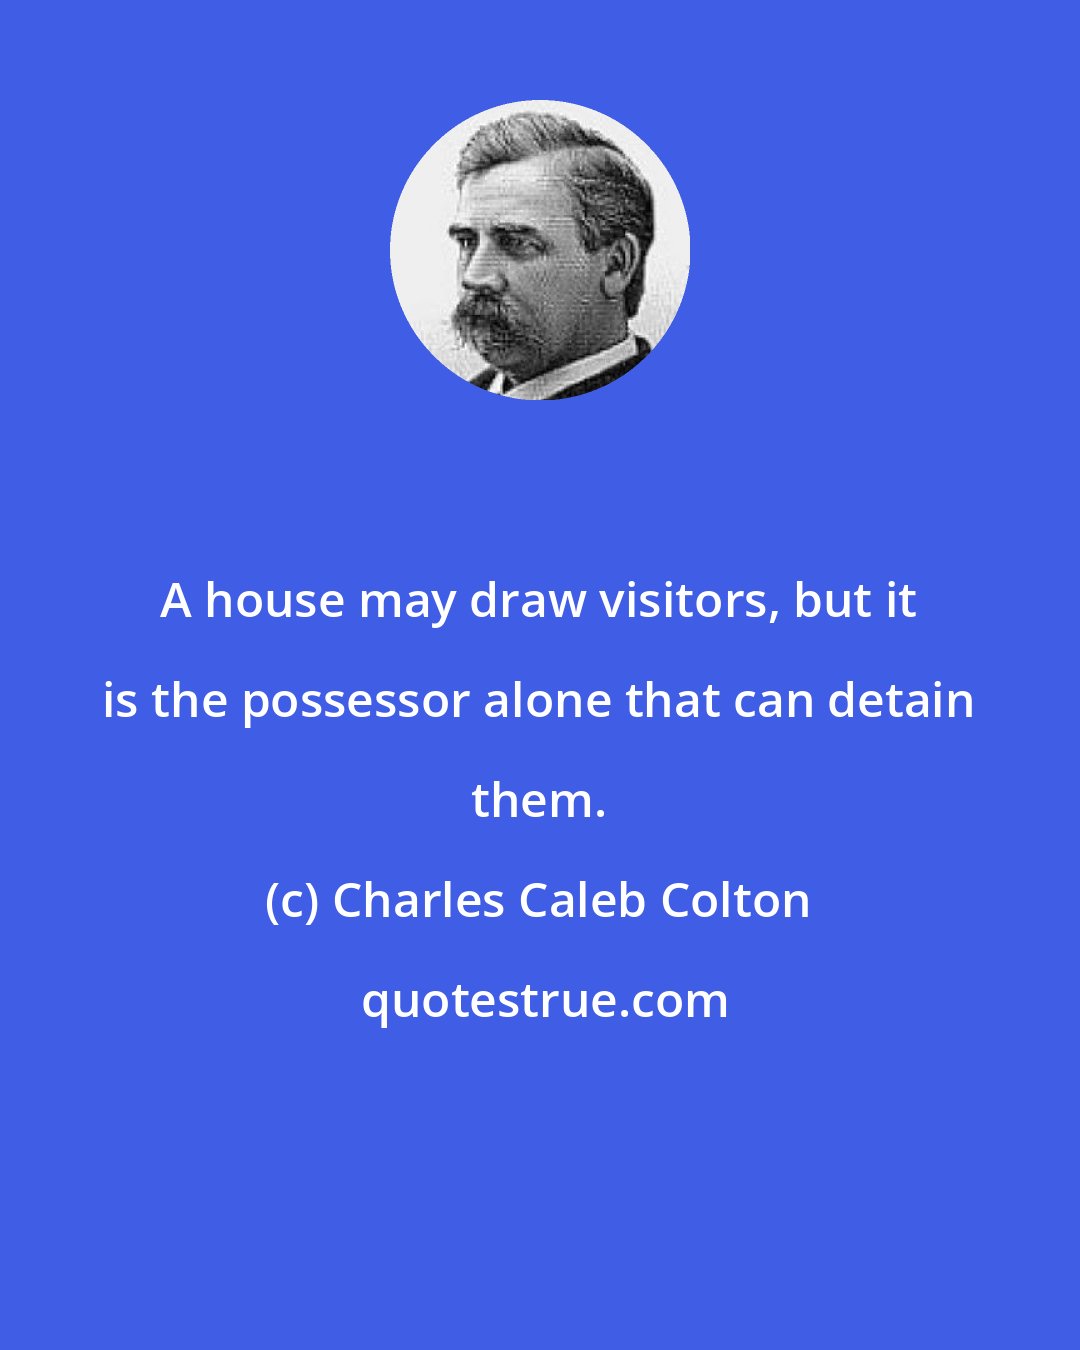 Charles Caleb Colton: A house may draw visitors, but it is the possessor alone that can detain them.